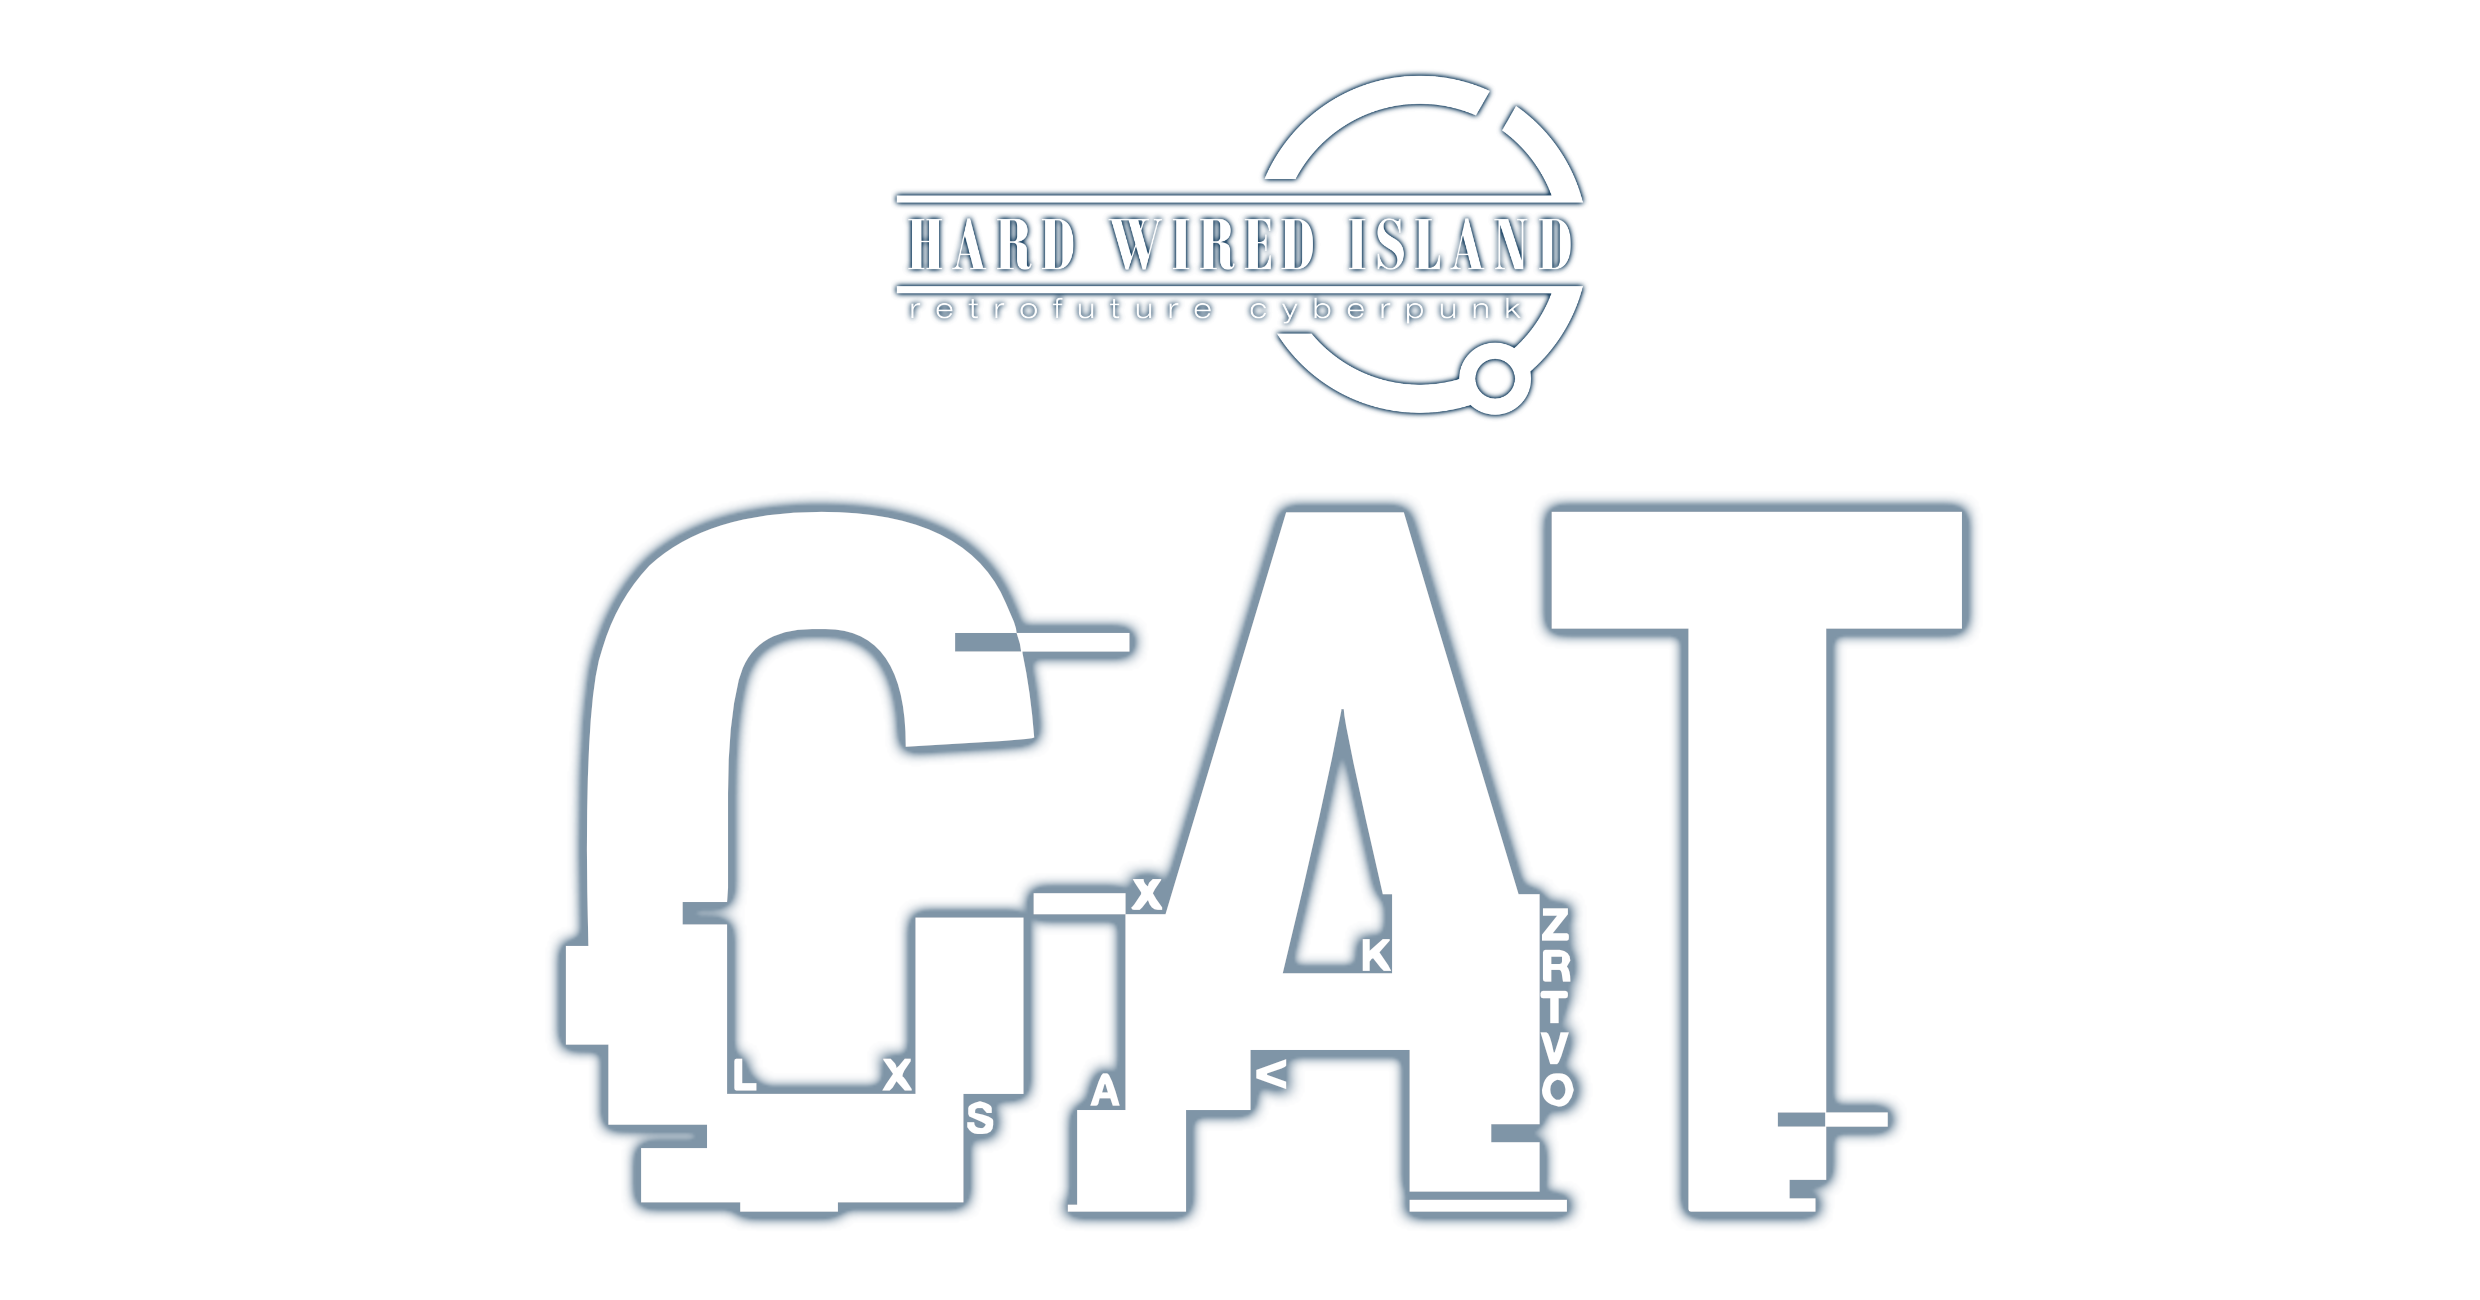 The Cat: A Hard Wired Island Occupation